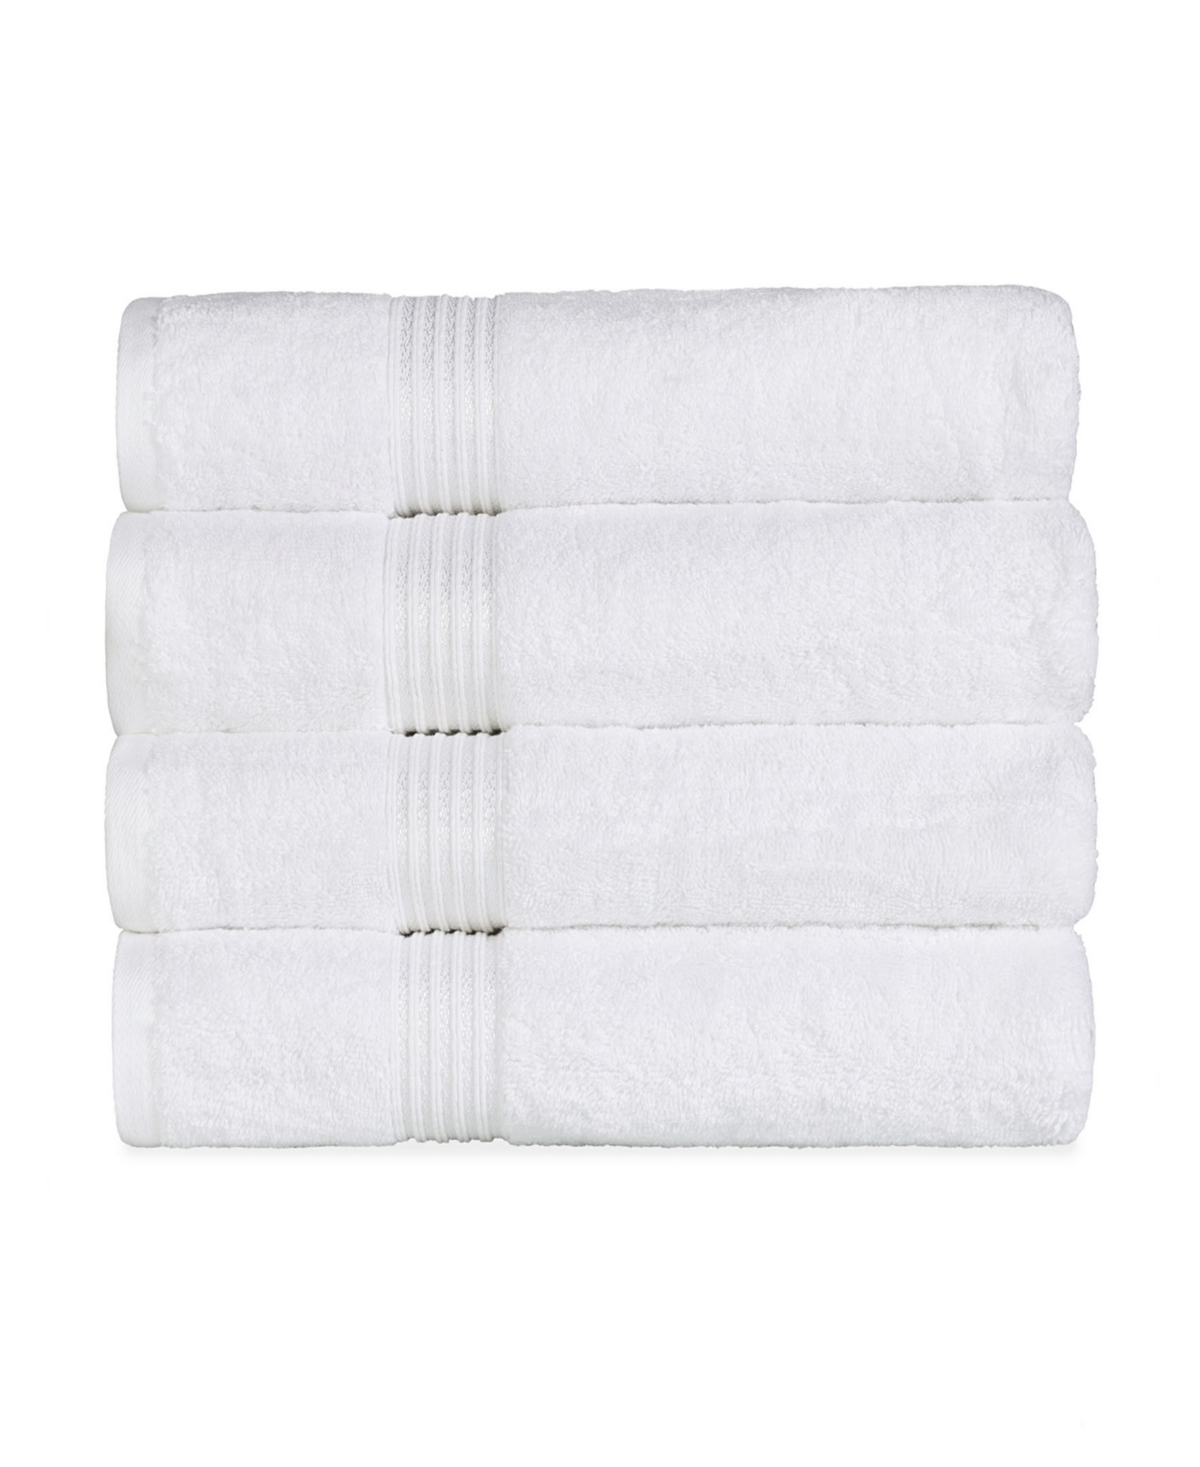 Superior Solid Quick Drying Absorbent 4 Piece Egyptian Cotton Bath Towel Set Bedding In White